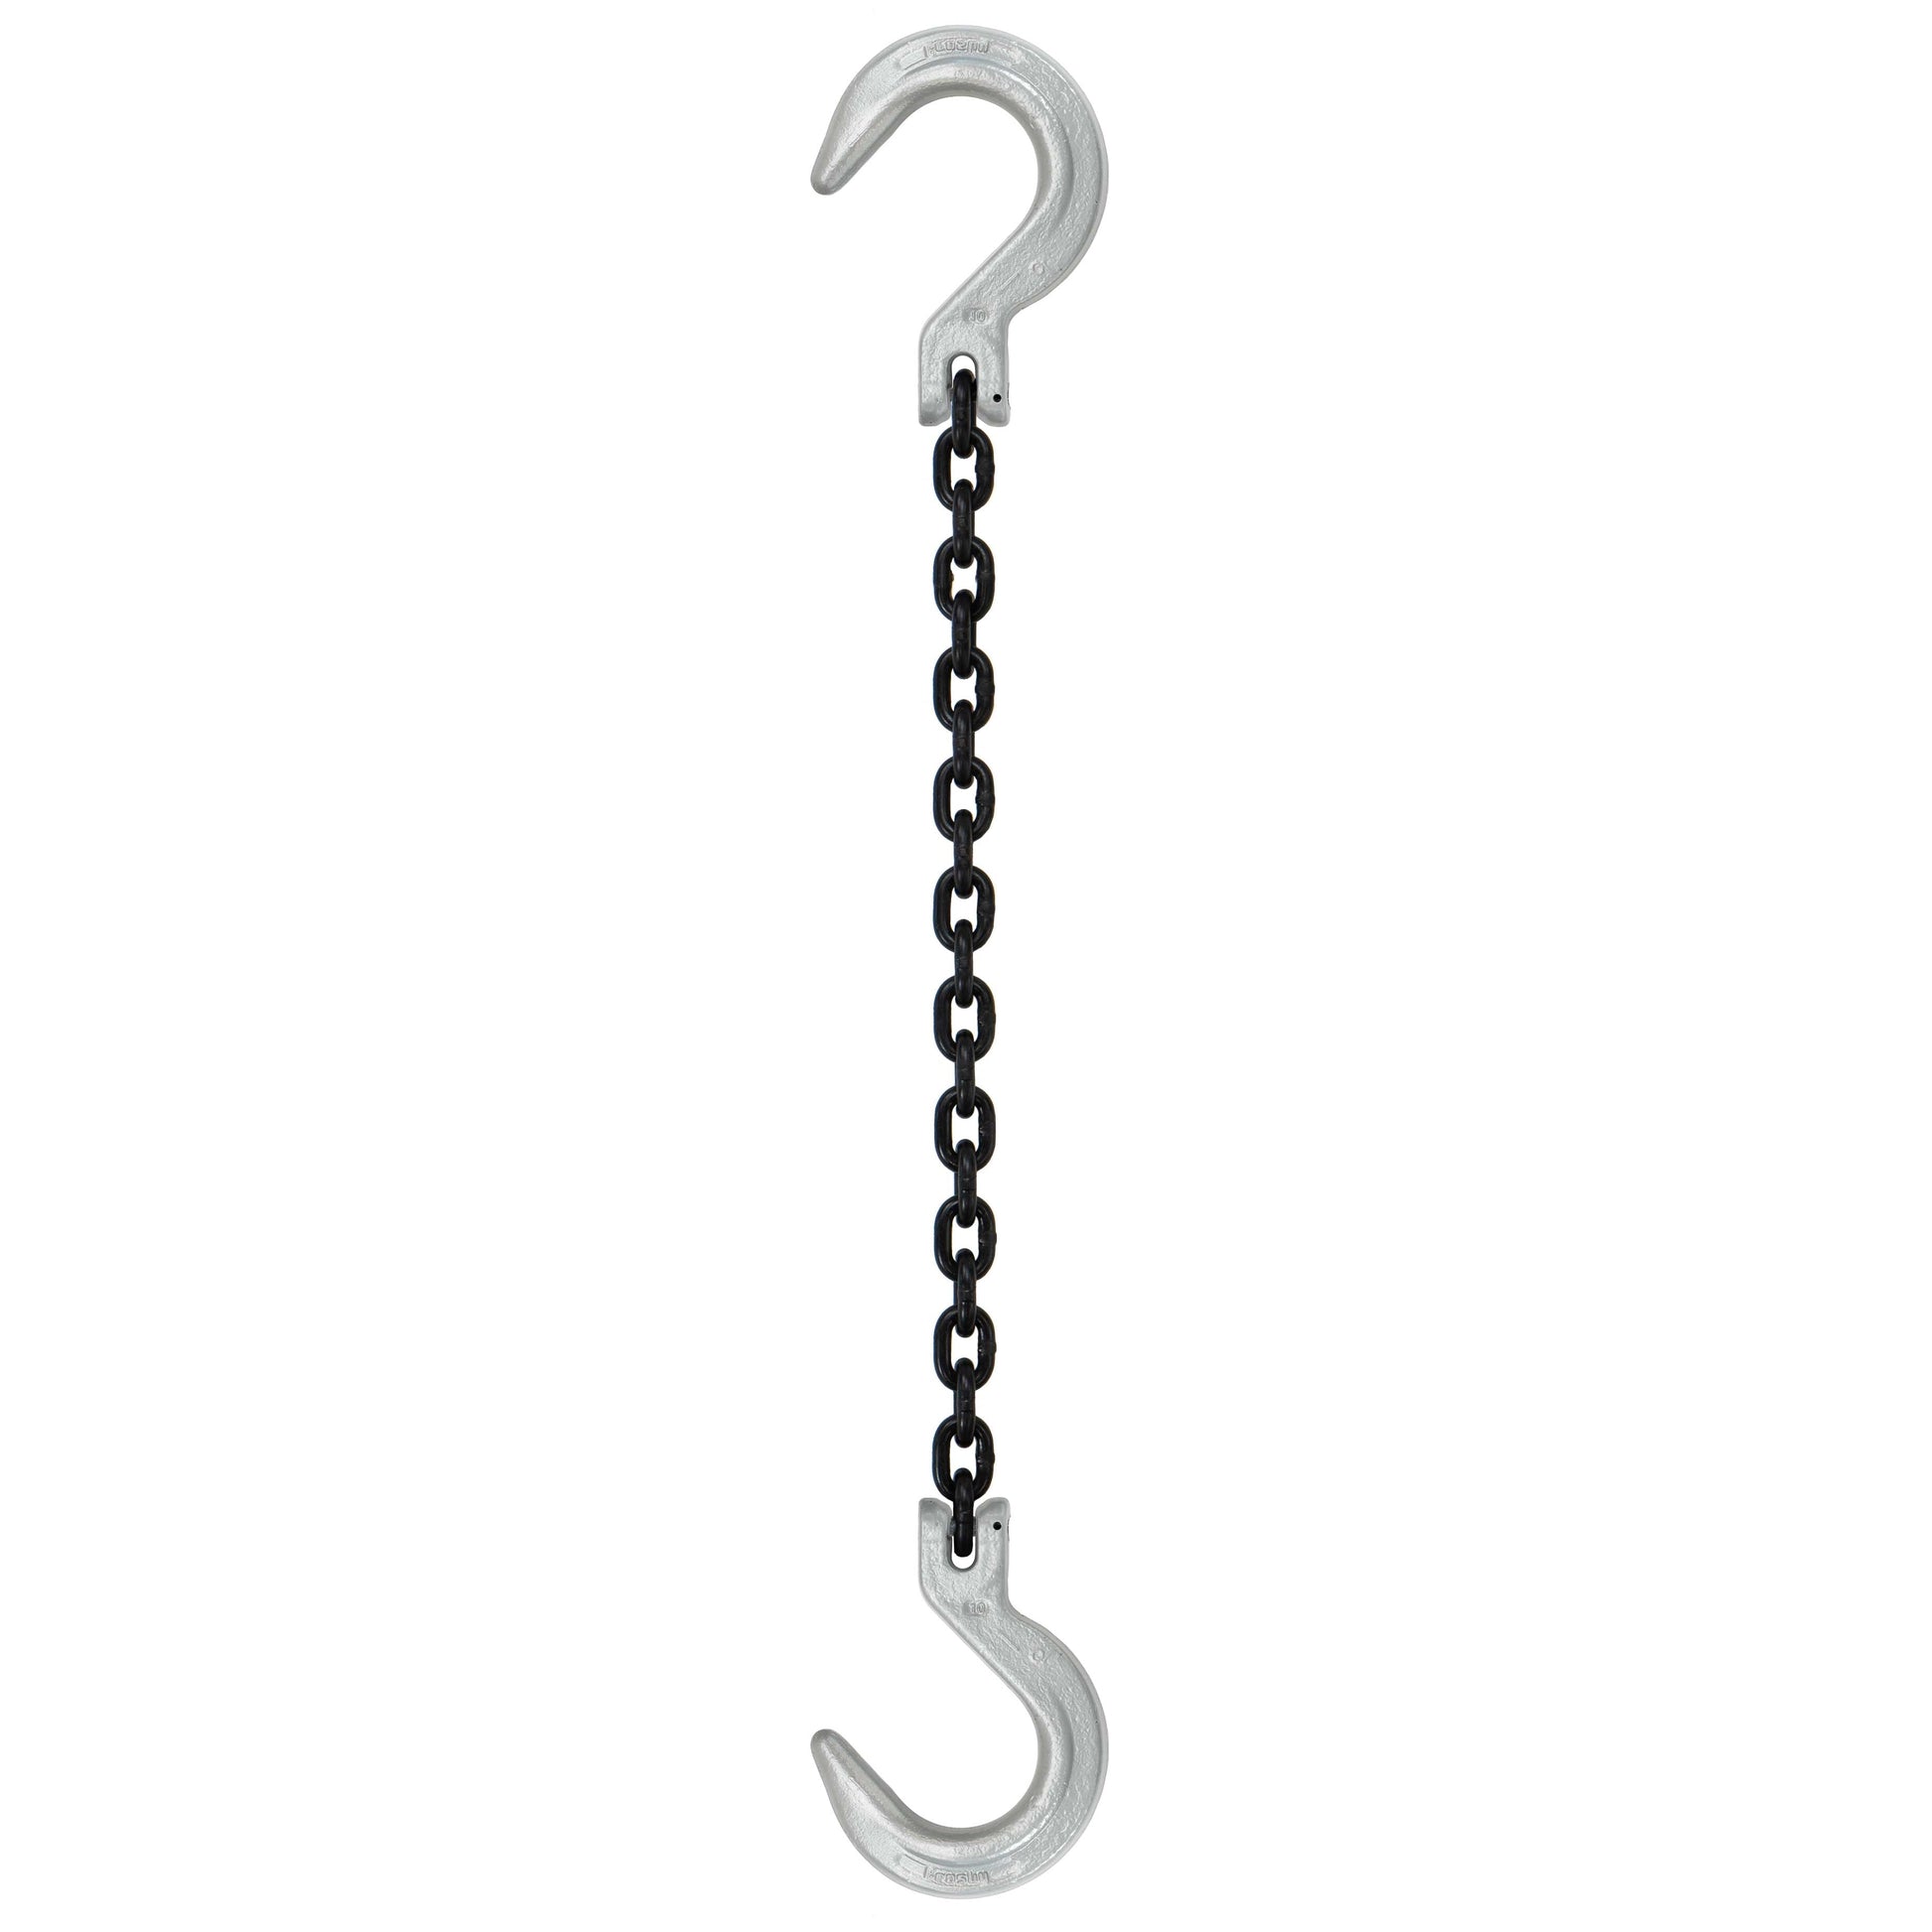 932 inch x 18 foot Domestic Single Leg Chain Sling w Crosby Foundry & Foundry Hooks Grade 100 image 1 of 2